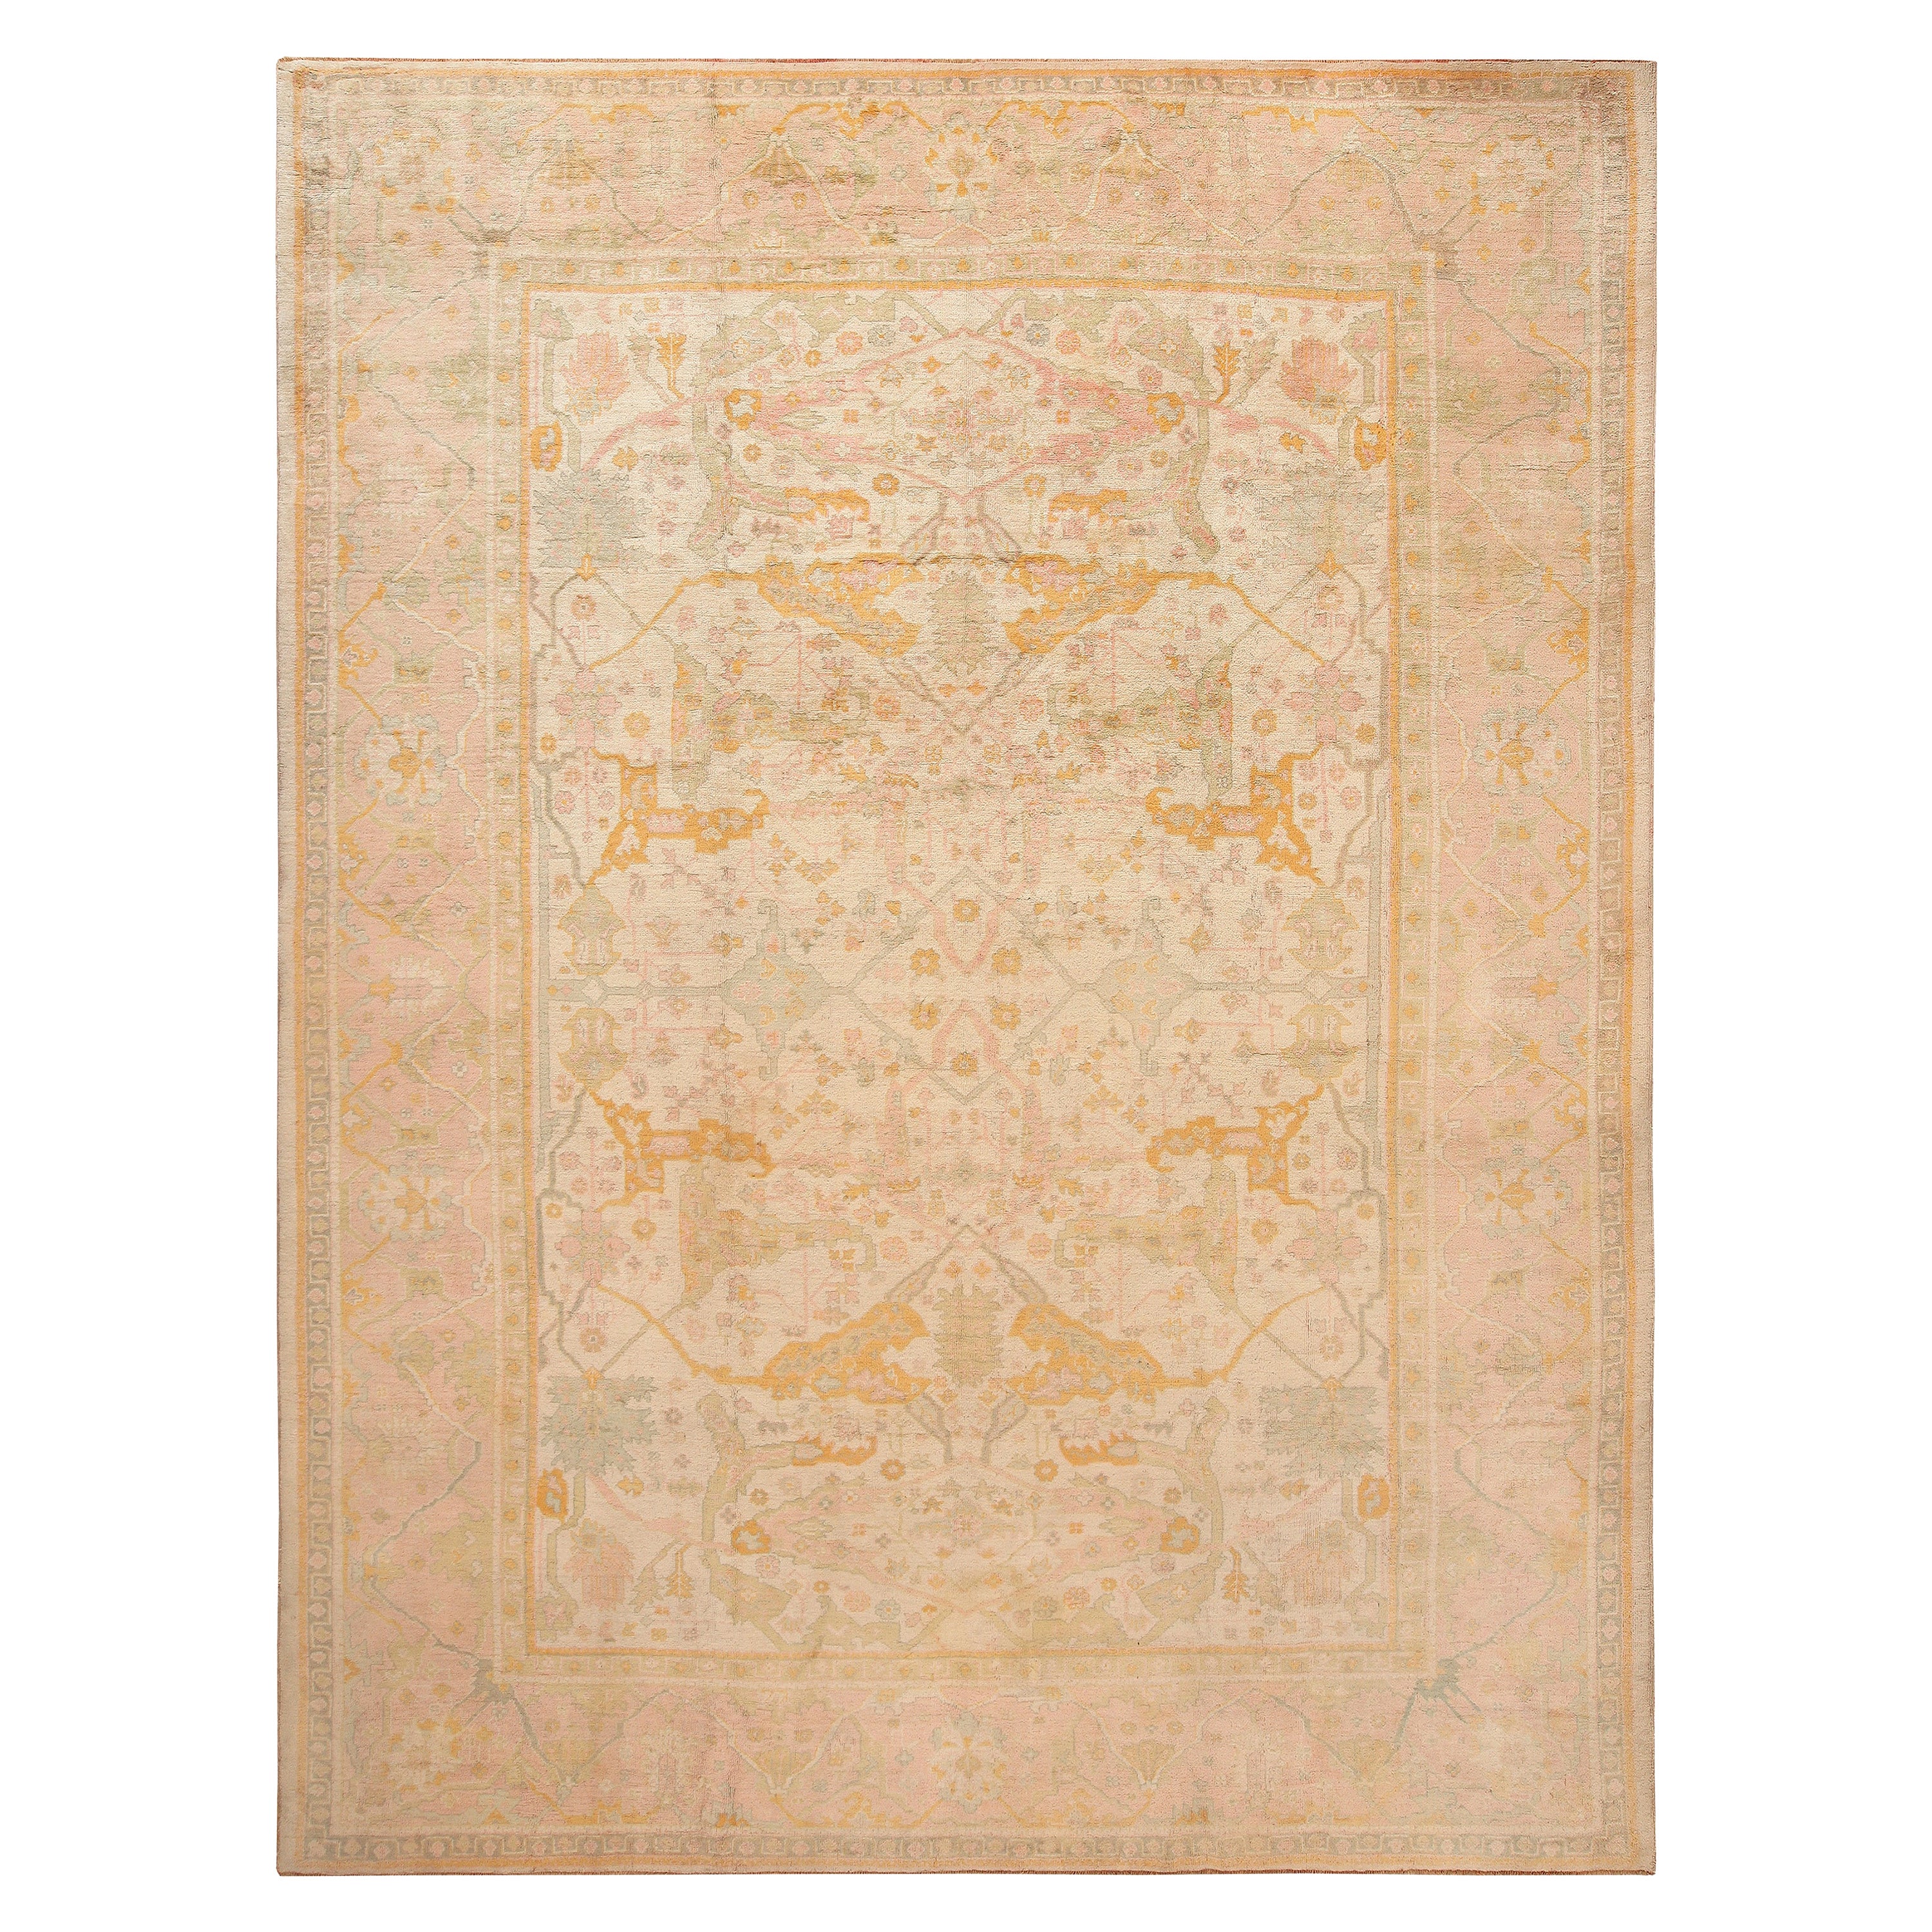 Beautiful Soft And Decorative Antique Turkish Oushak Rug 11'6" x 15' For Sale